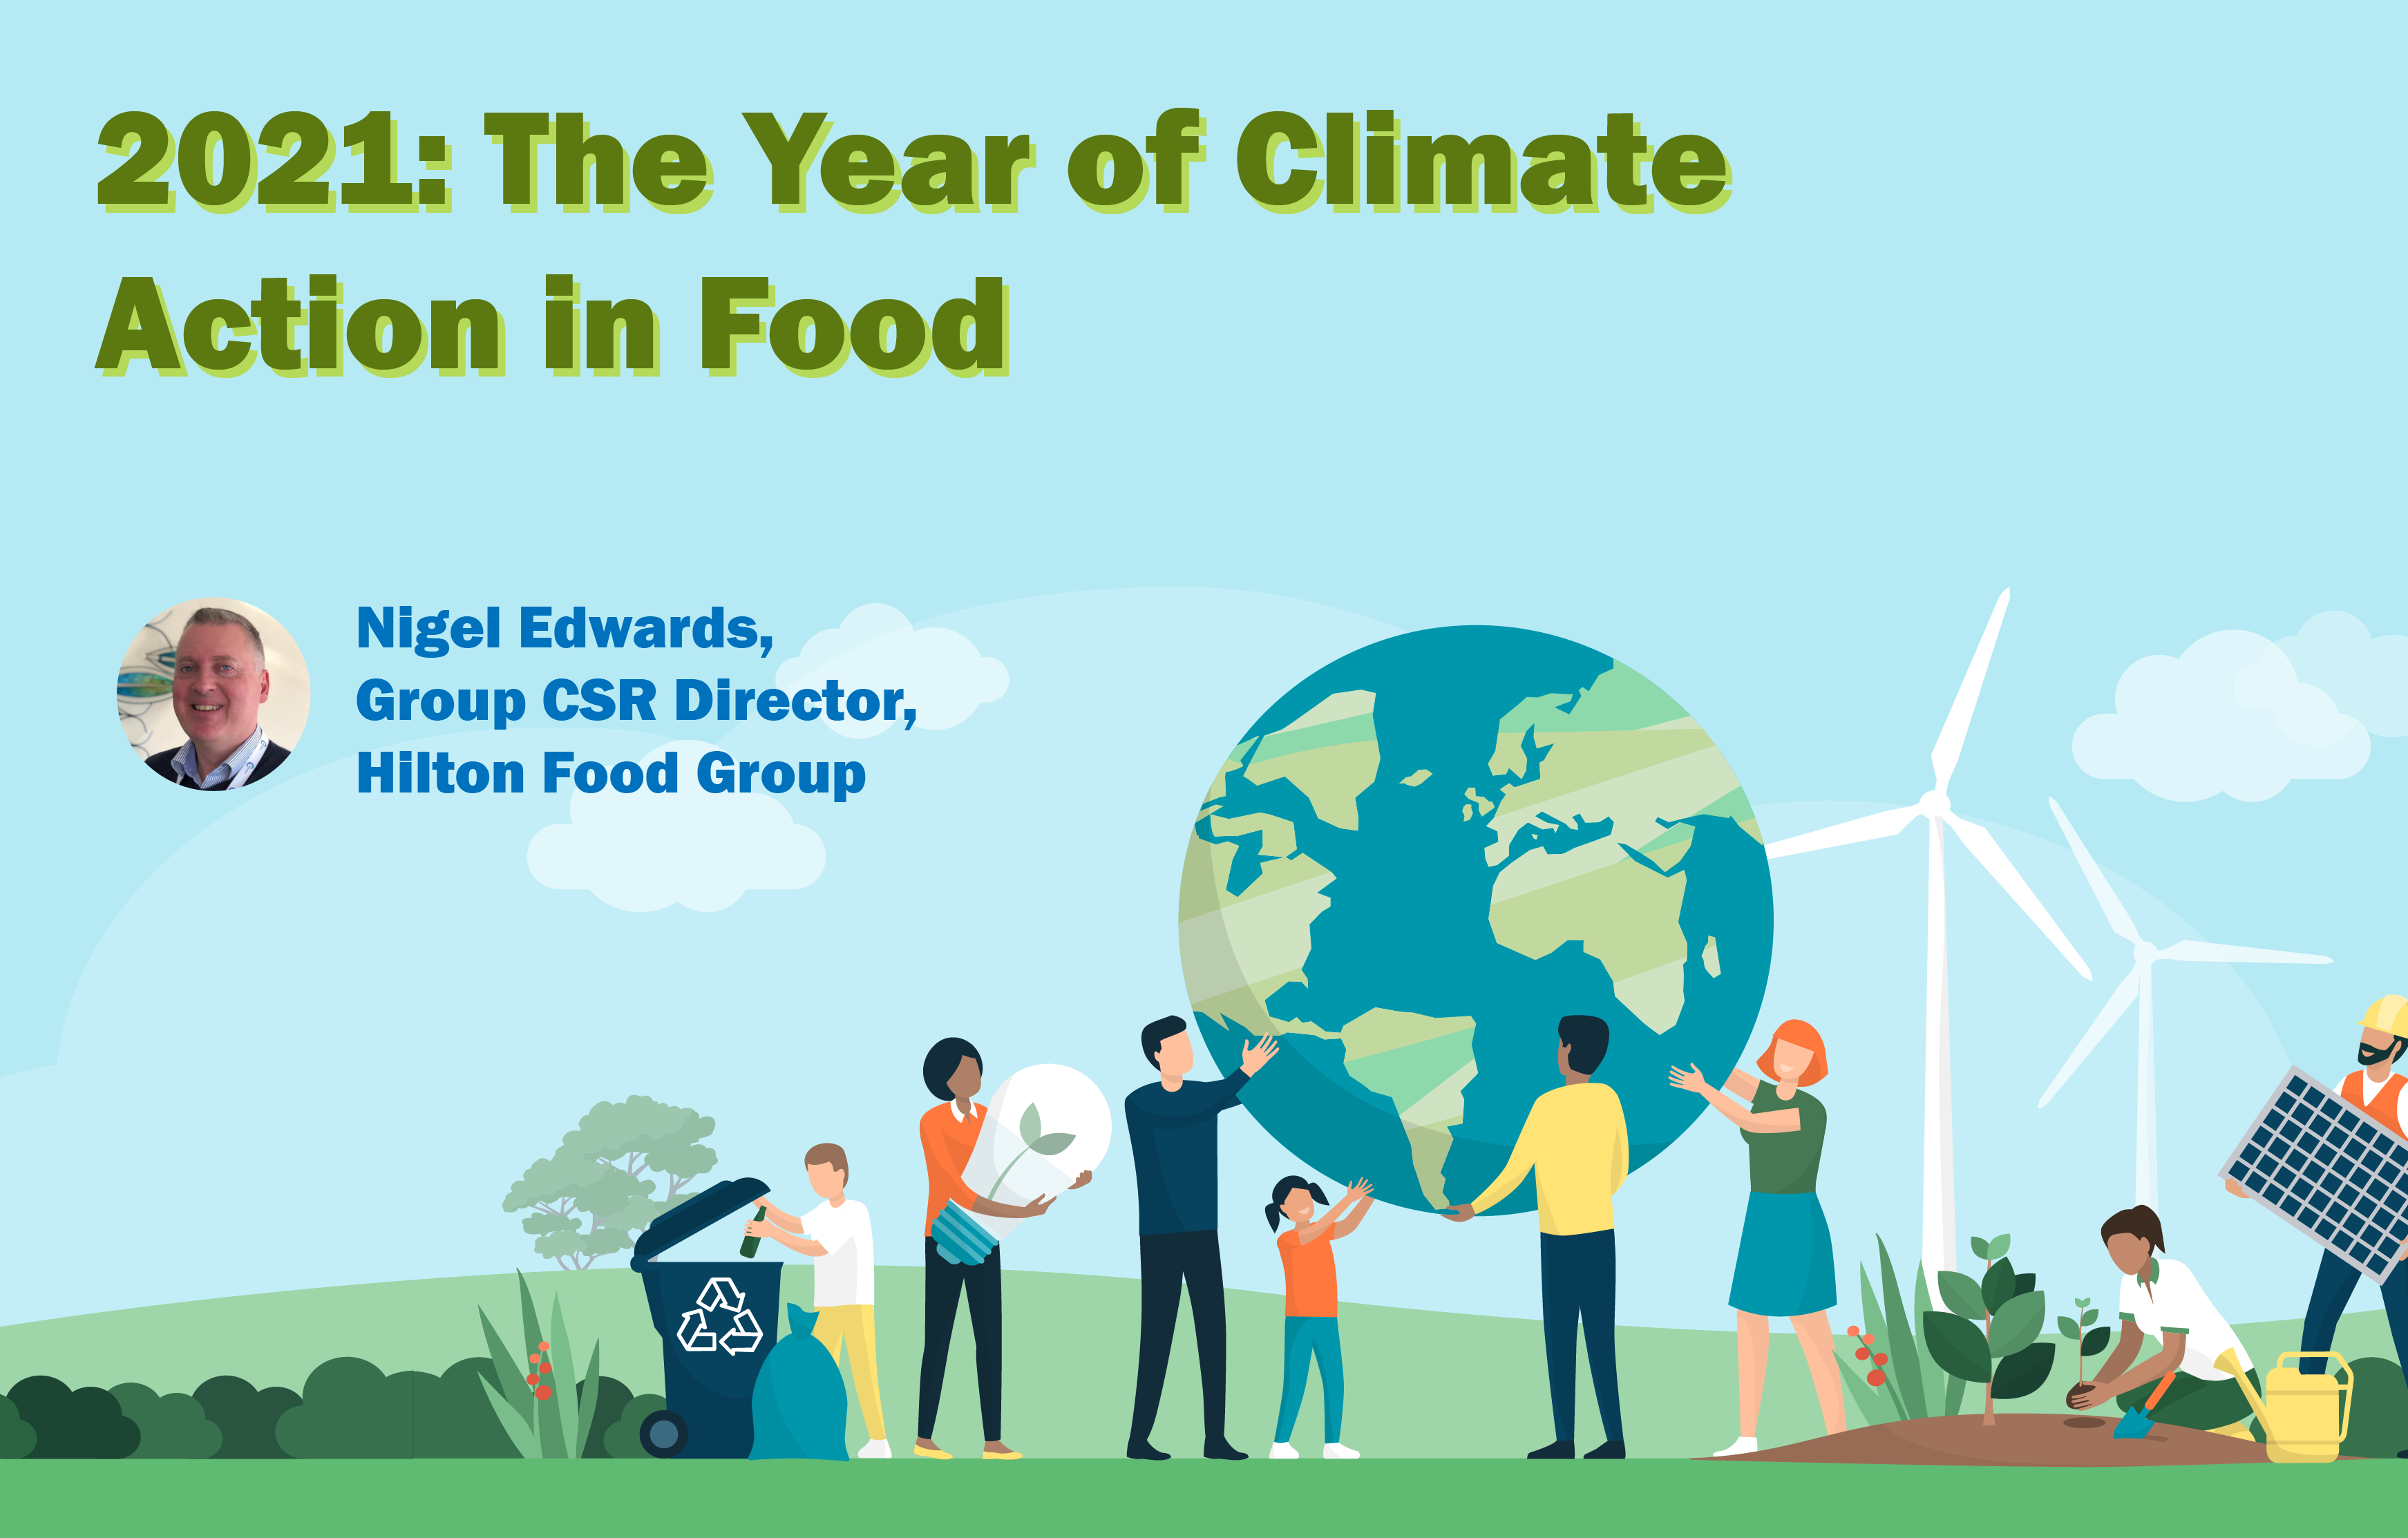 2021: The Year of Climate Action in the Food Industry